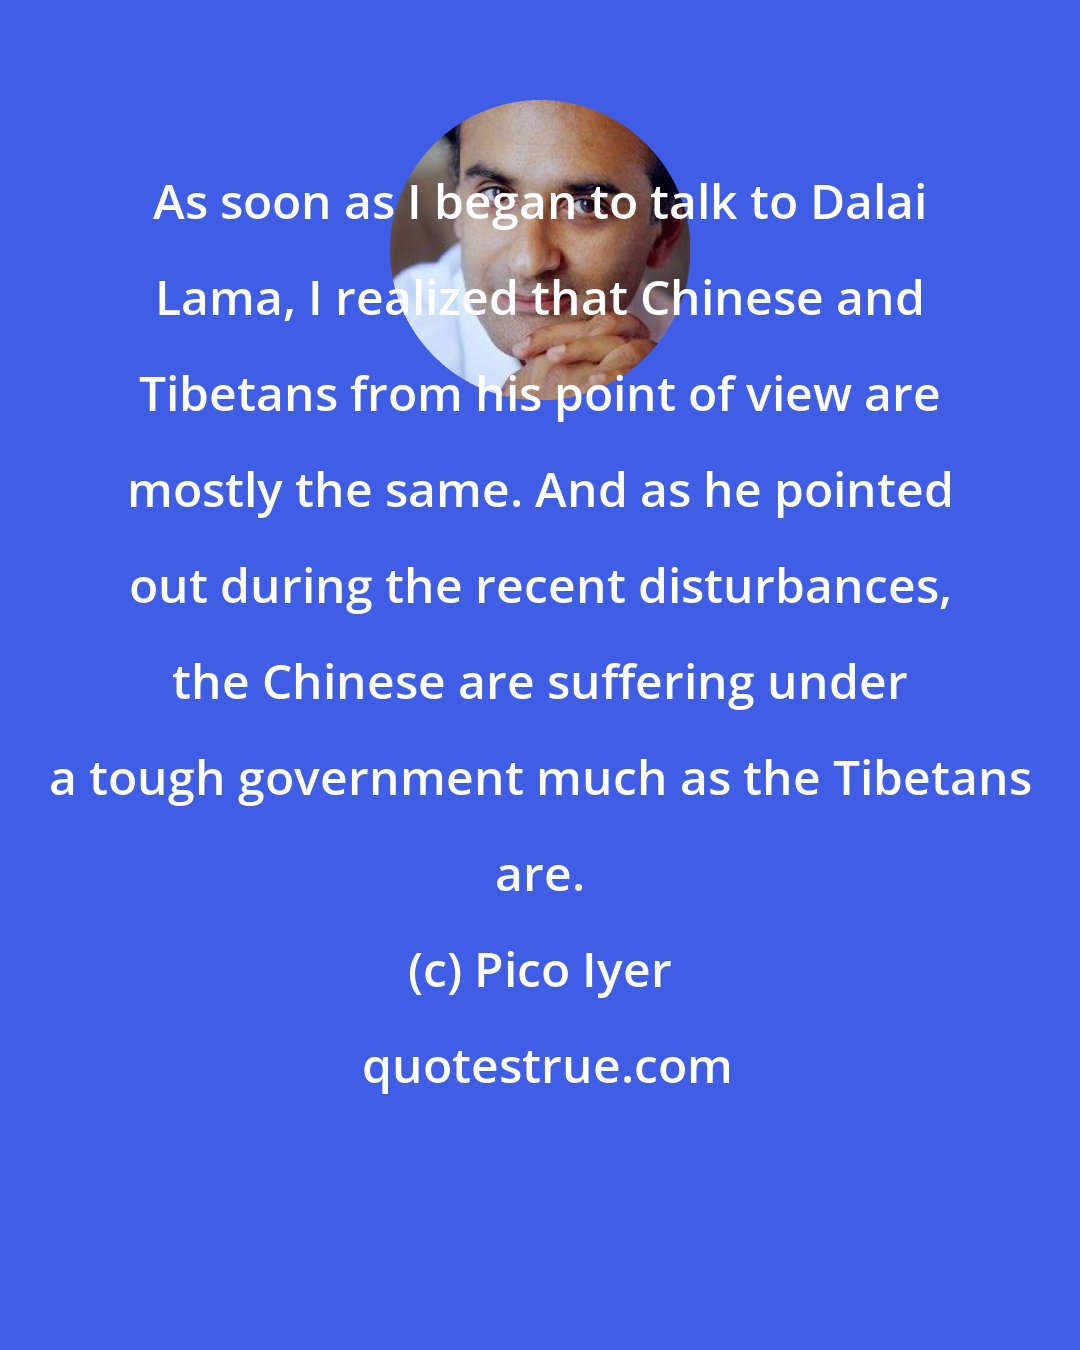 Pico Iyer: As soon as I began to talk to Dalai Lama, I realized that Chinese and Tibetans from his point of view are mostly the same. And as he pointed out during the recent disturbances, the Chinese are suffering under a tough government much as the Tibetans are.